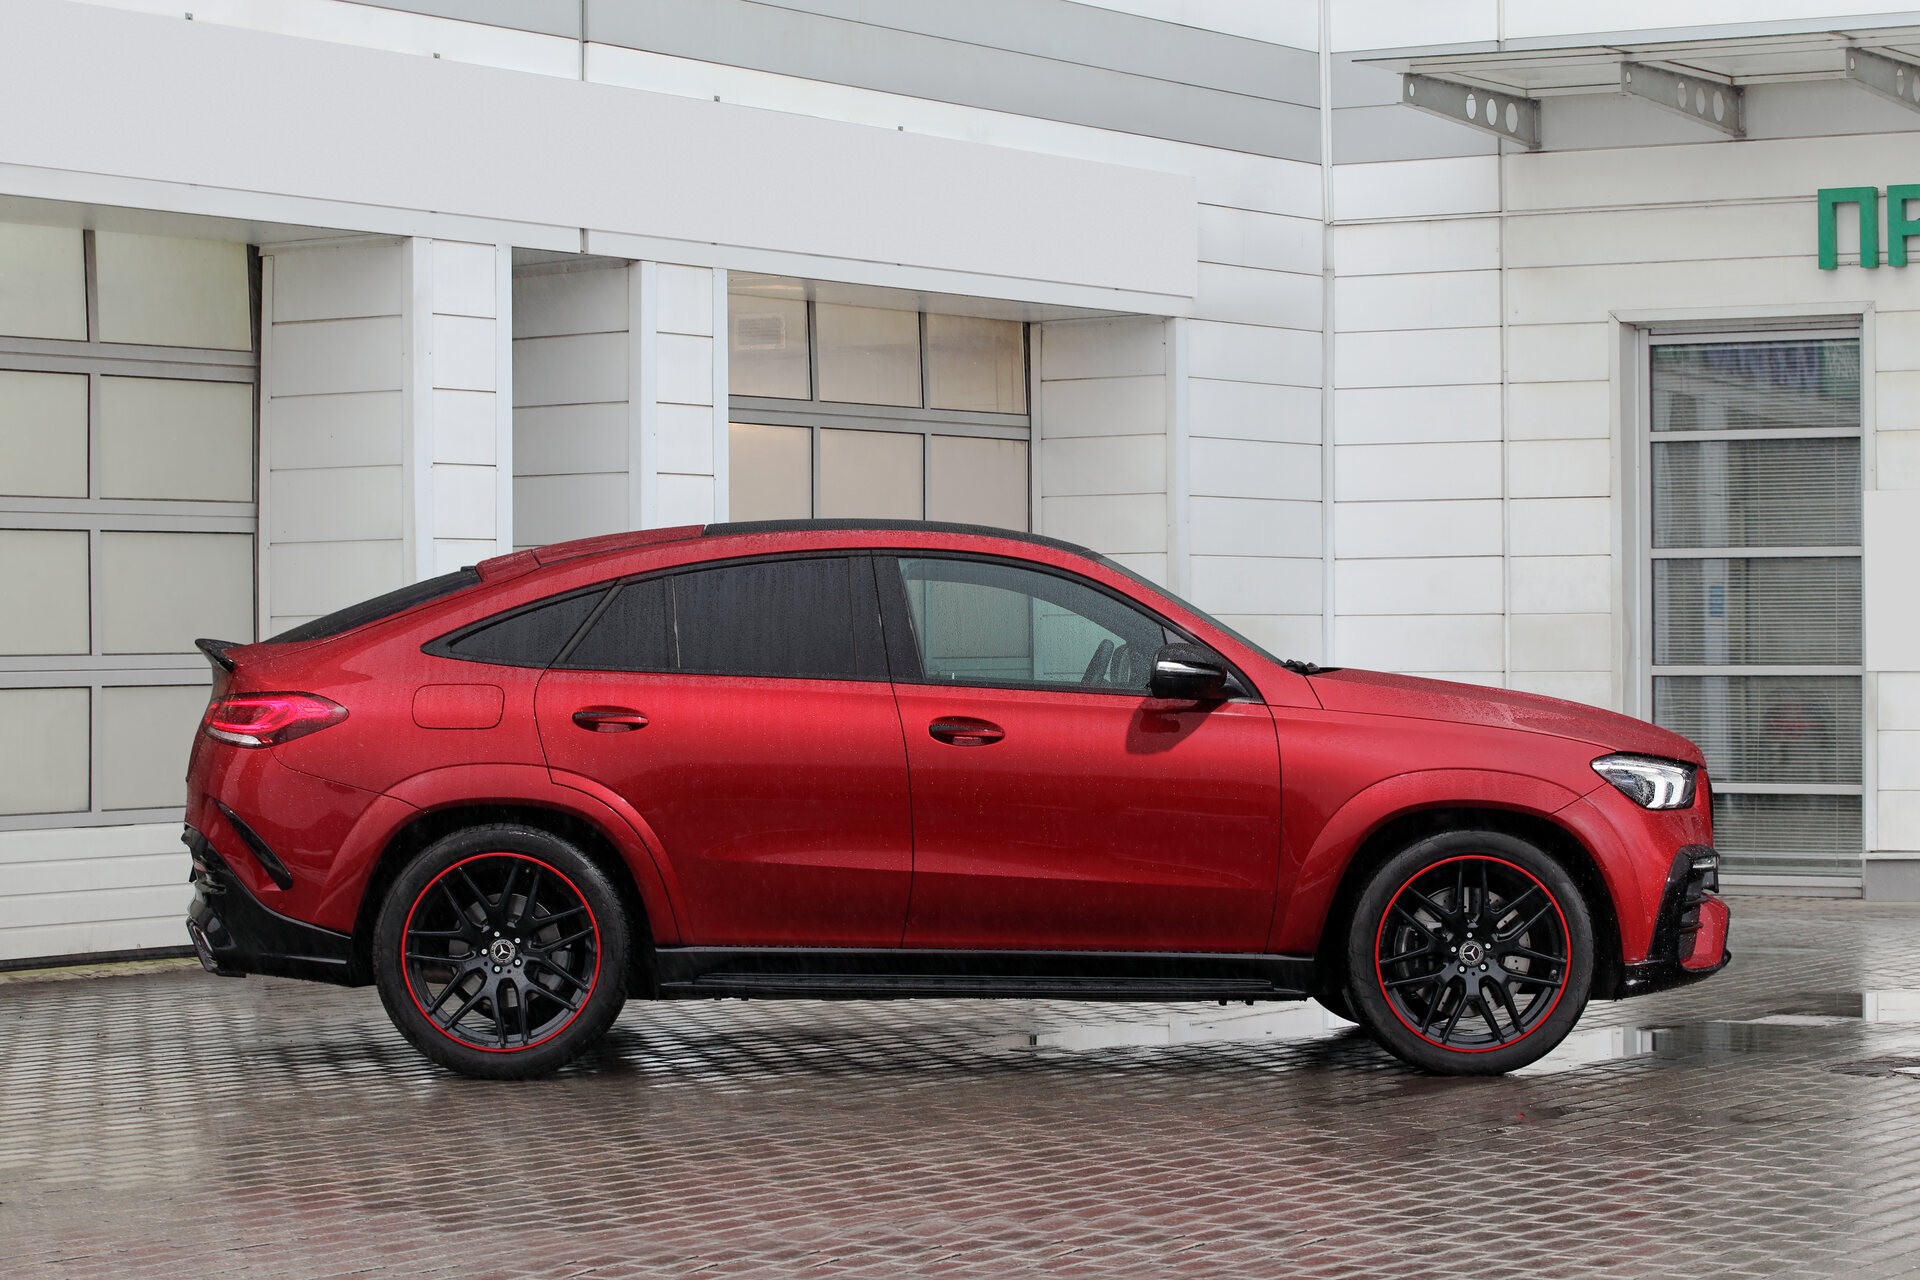 Check our price and buy Topcar Design body kit for Mercedes-Benz GLE coupe C167 Inferno 2022!